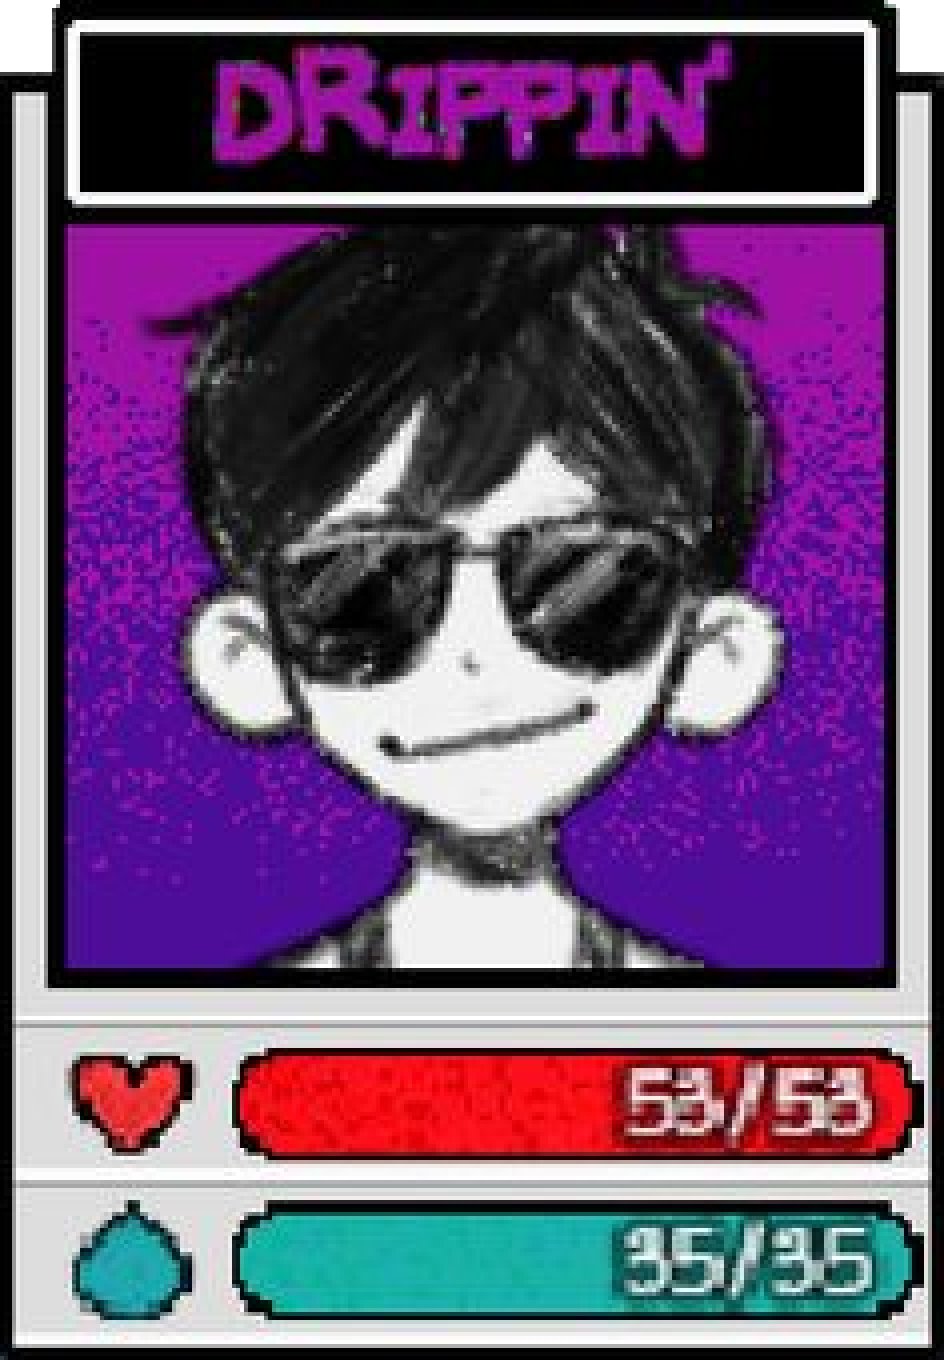 Semi-Infrequent OMORI Facts on X: Originally, the EMOTIONS system was  planned to have 4 tiers. Here is the cut 4th tier of HAPPY used by OMORI in  one early 2014 demo build